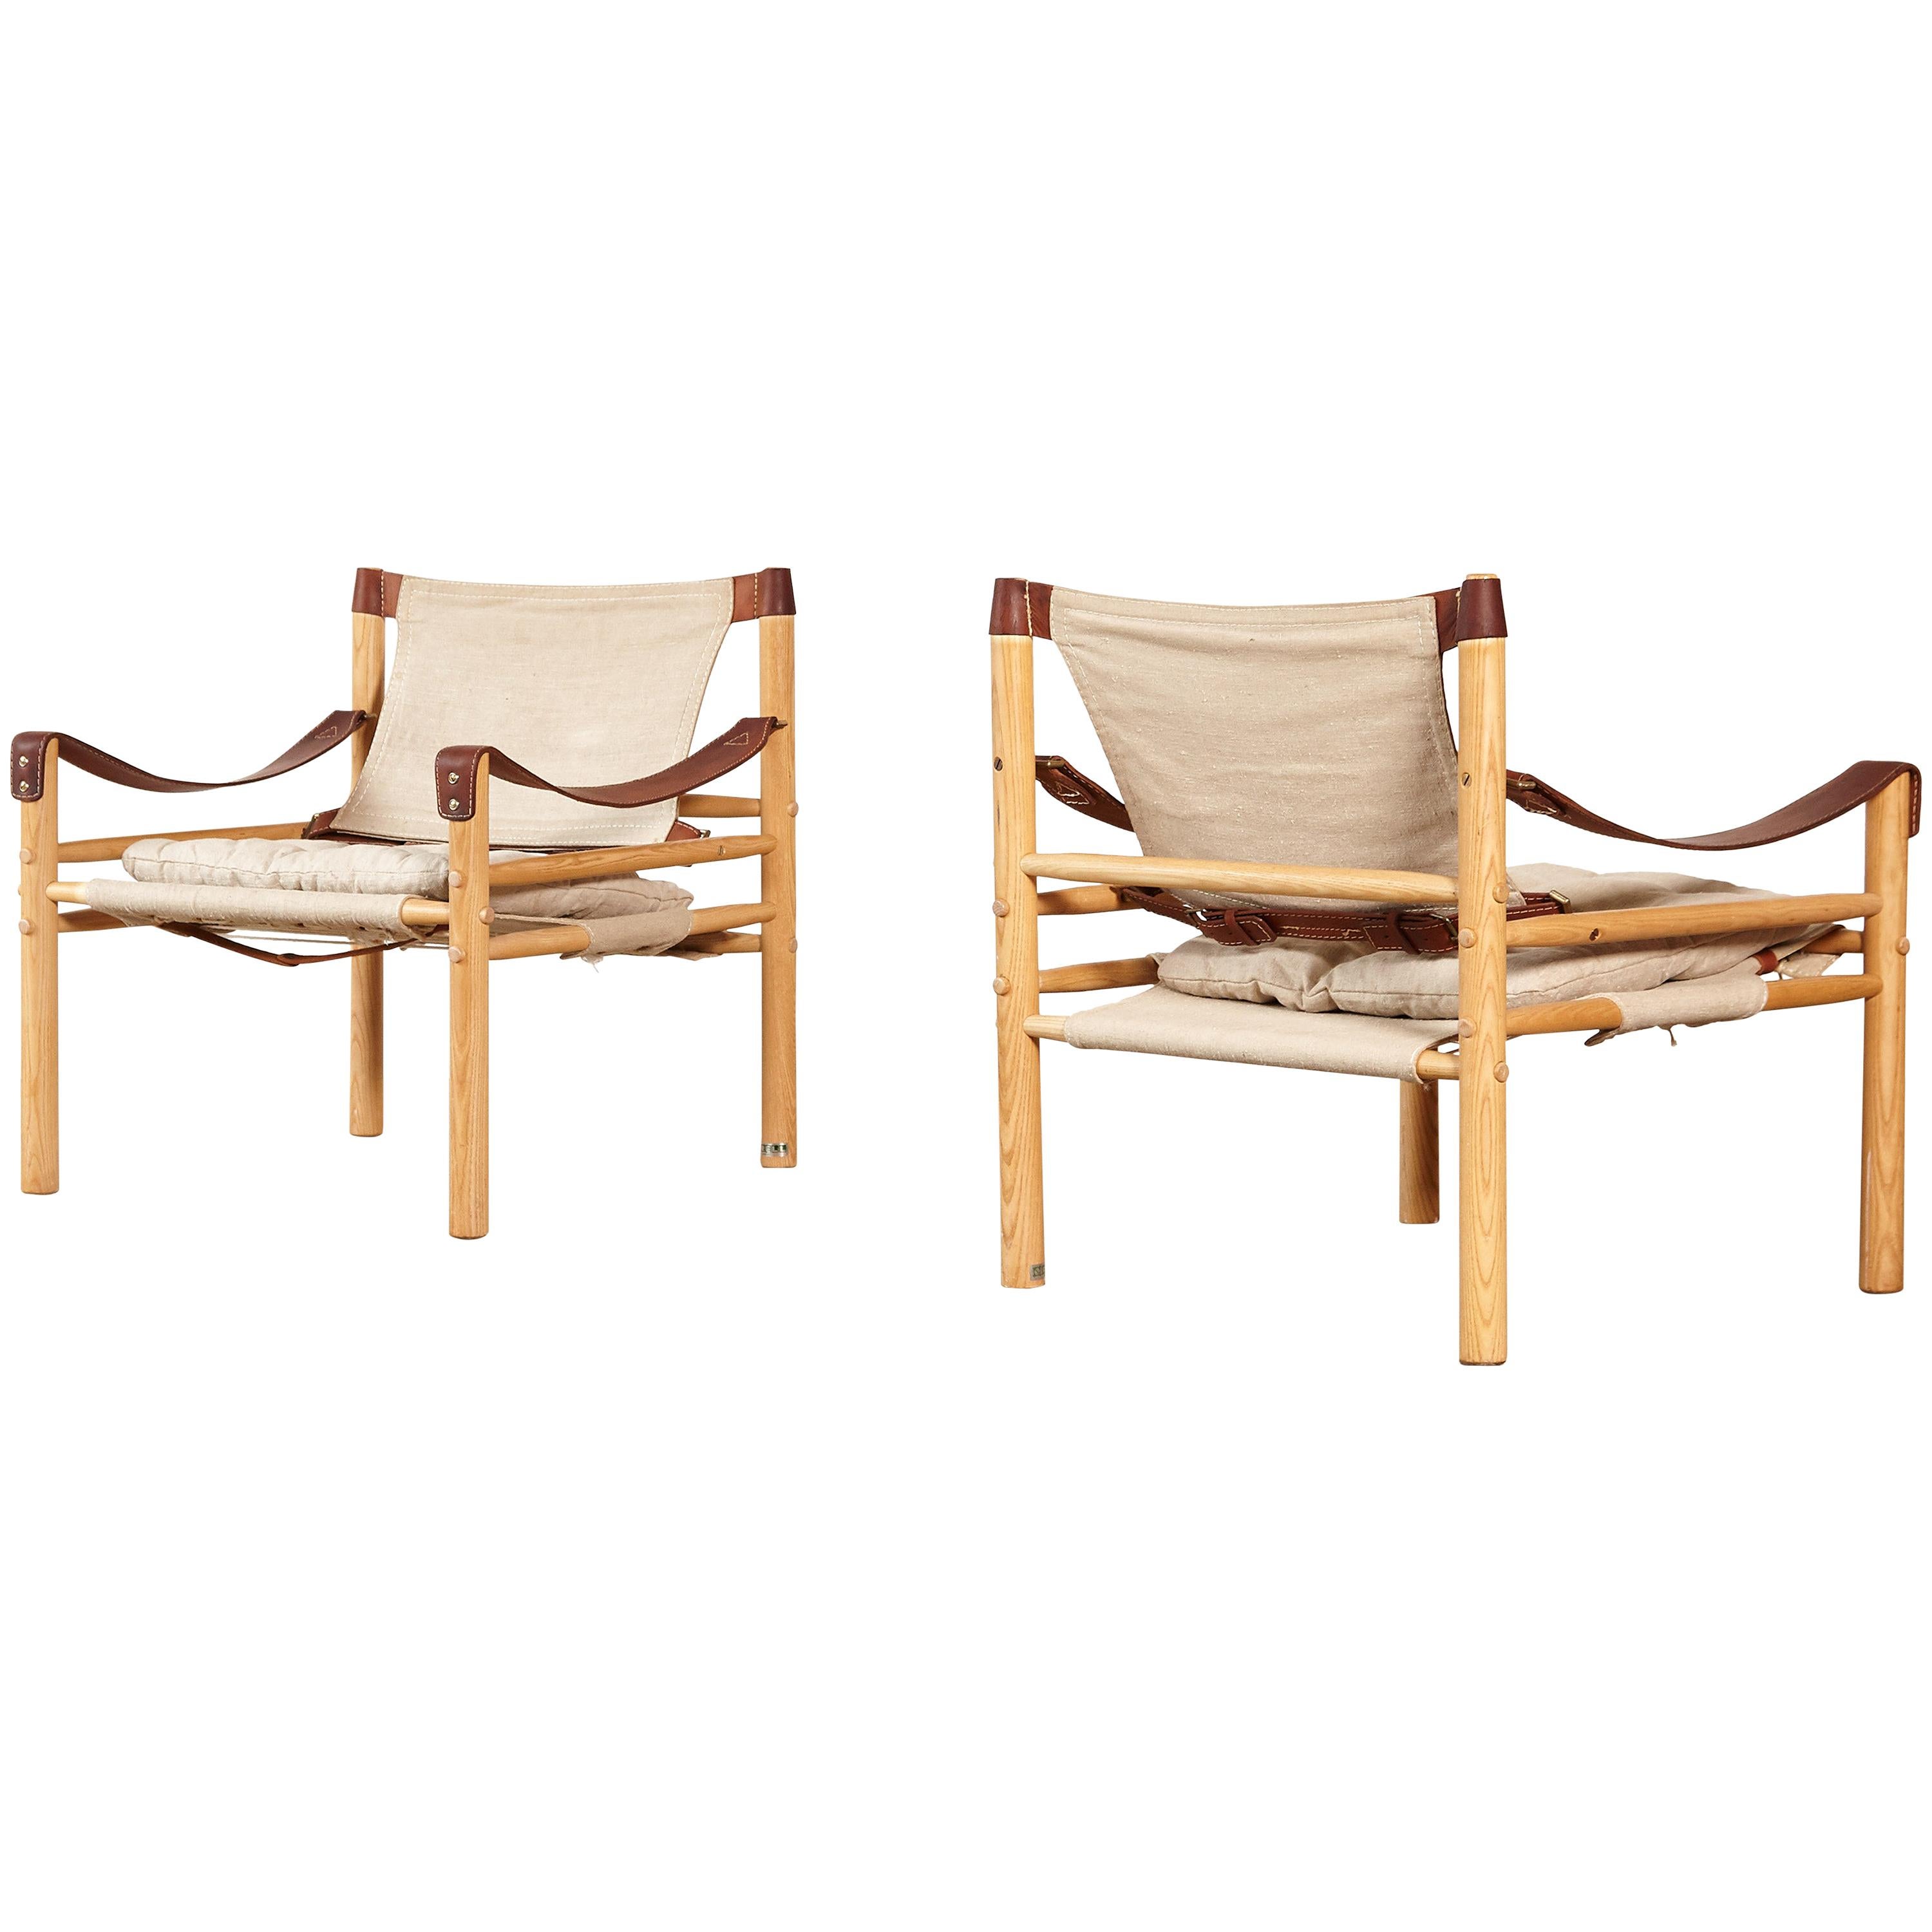 Pair of Arne Norell Safari Sirocco Lounge Chairs, Norell Mobel, Sweden, 1970s